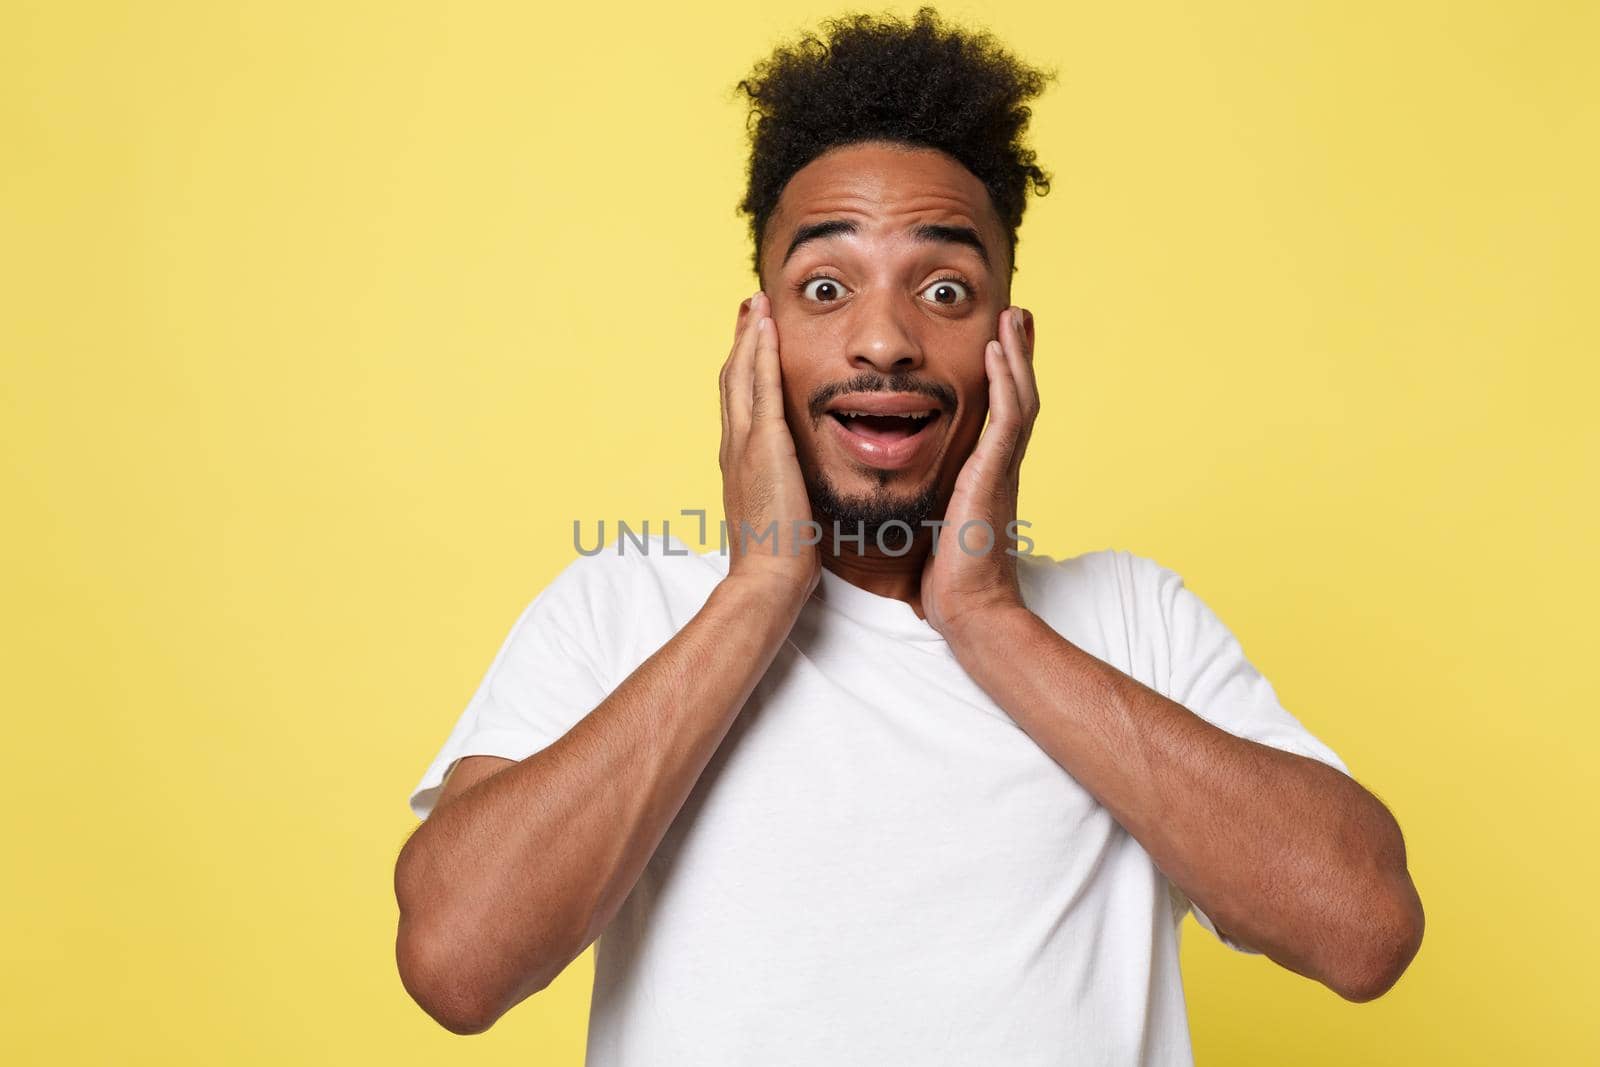 Emotional and People Concept - Portrait of excited young African American man screaming in shock and amazement holding hands on head